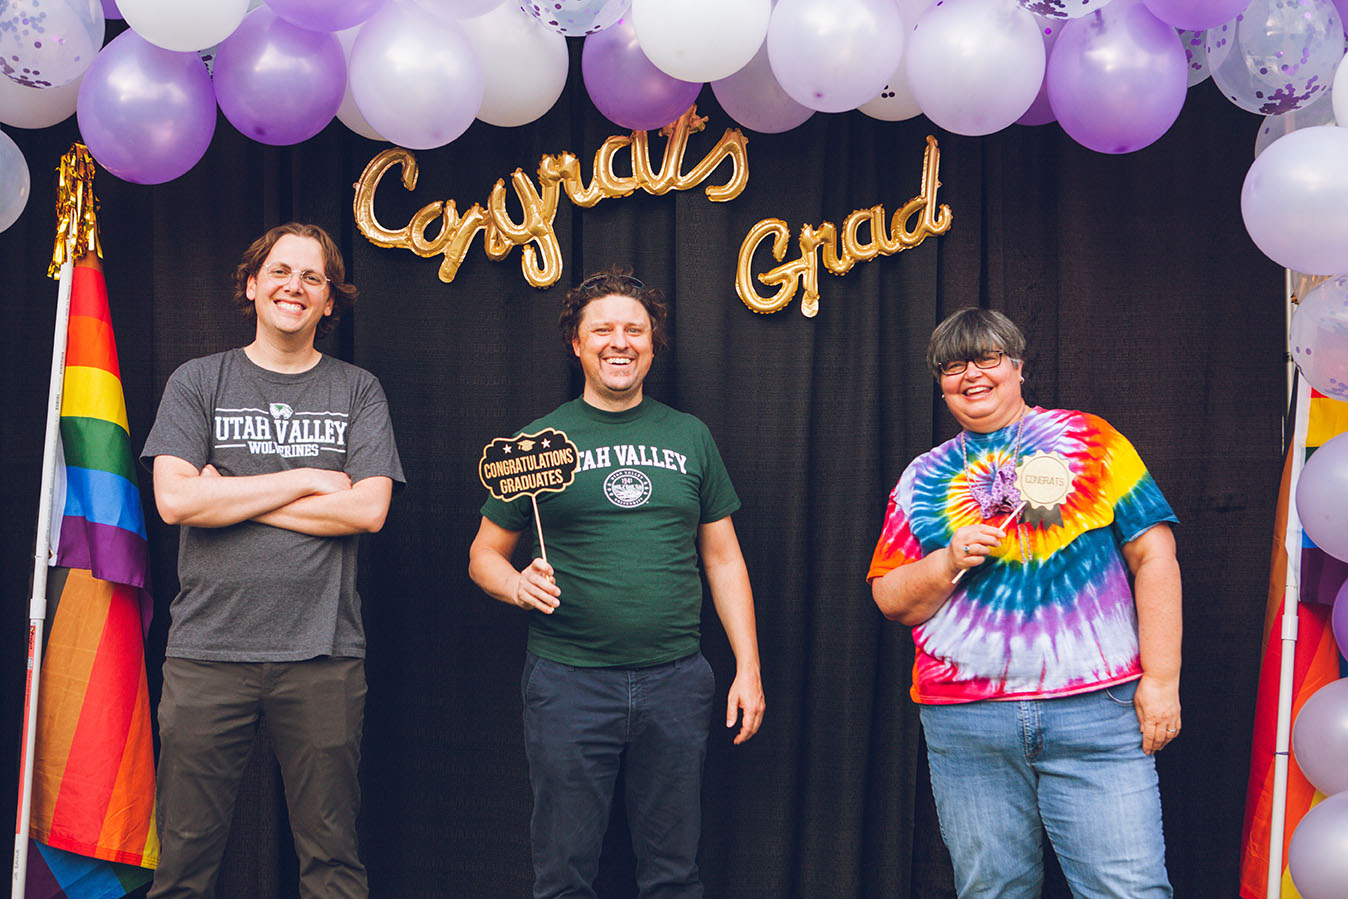 Student Health Services' Therapists attending Lavender Graduation 2021. Left to right: Ben Bailey, Ammon Cheney, and J.C. Graham.